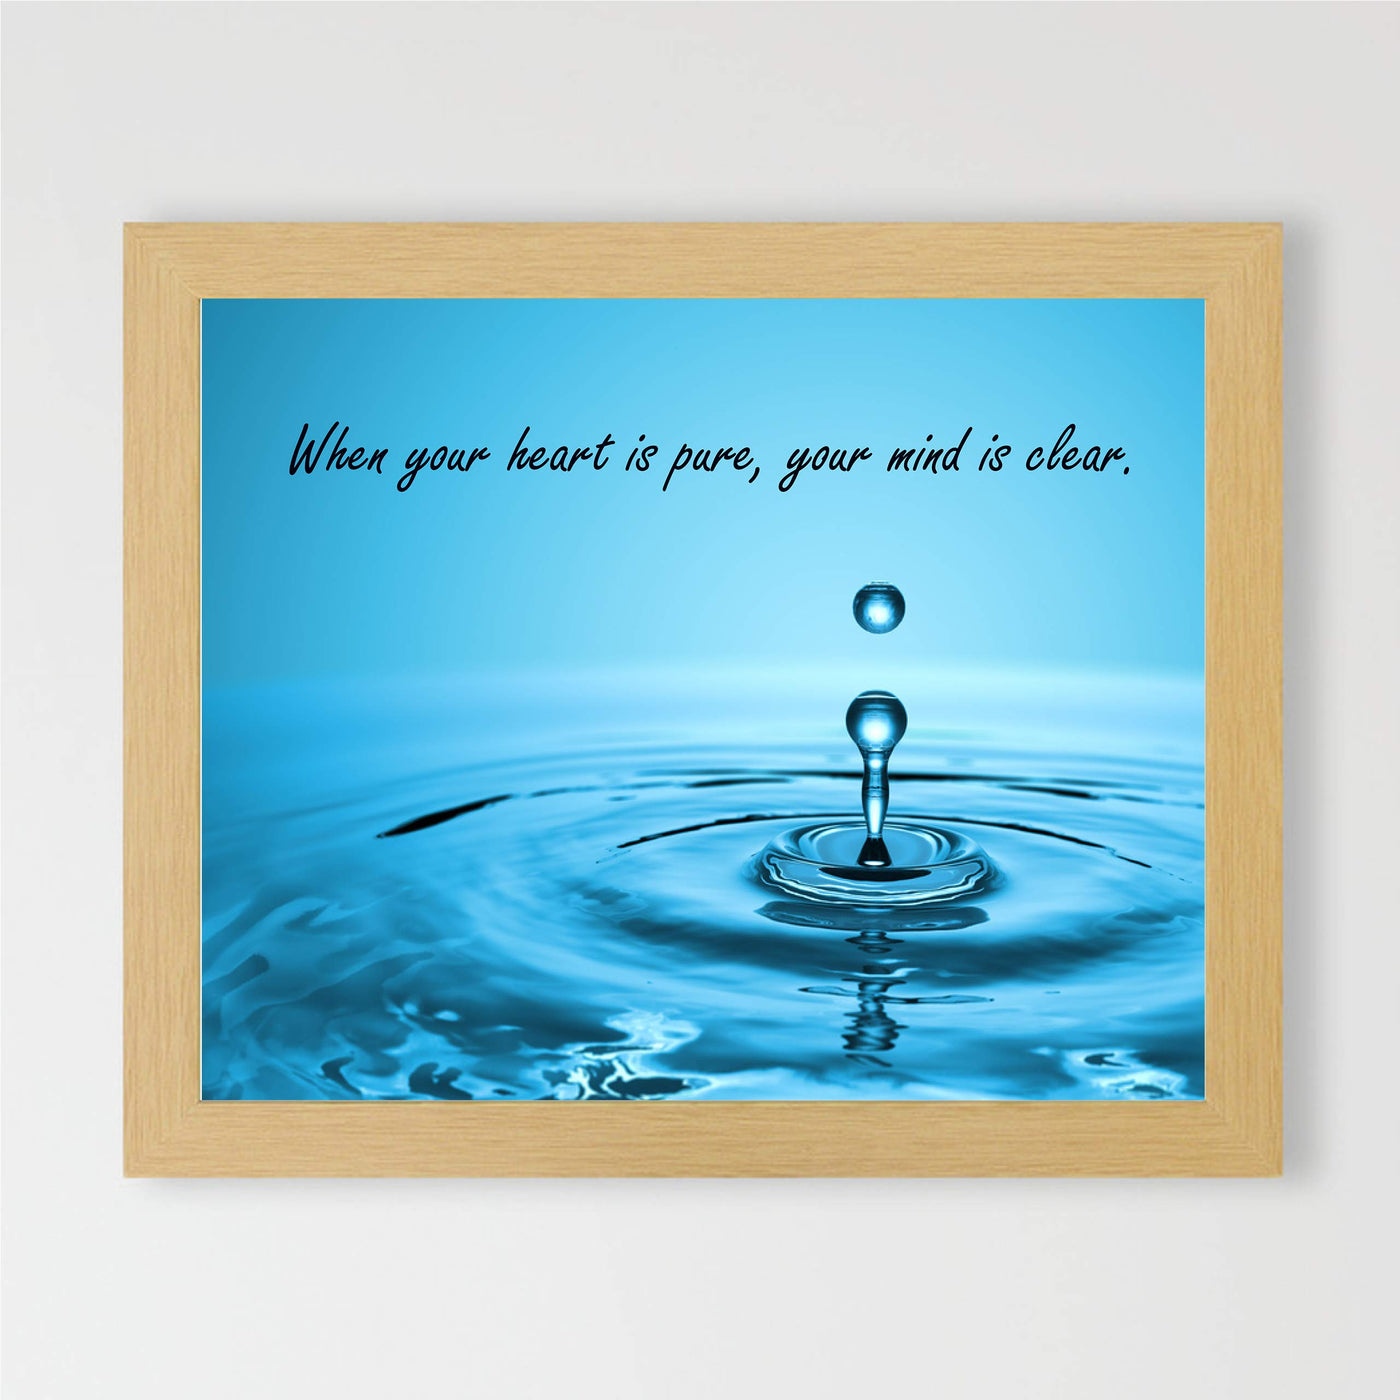 ?When Your Heart Is Pure, Your Mind Is Clear?-Spiritual Quotes Wall Art - 10 x 8" Inspirational Poster Print-Ready to Frame. Home-Office-Yoga Studio-Spa Decor. Great Zen Reminder for Relaxation!